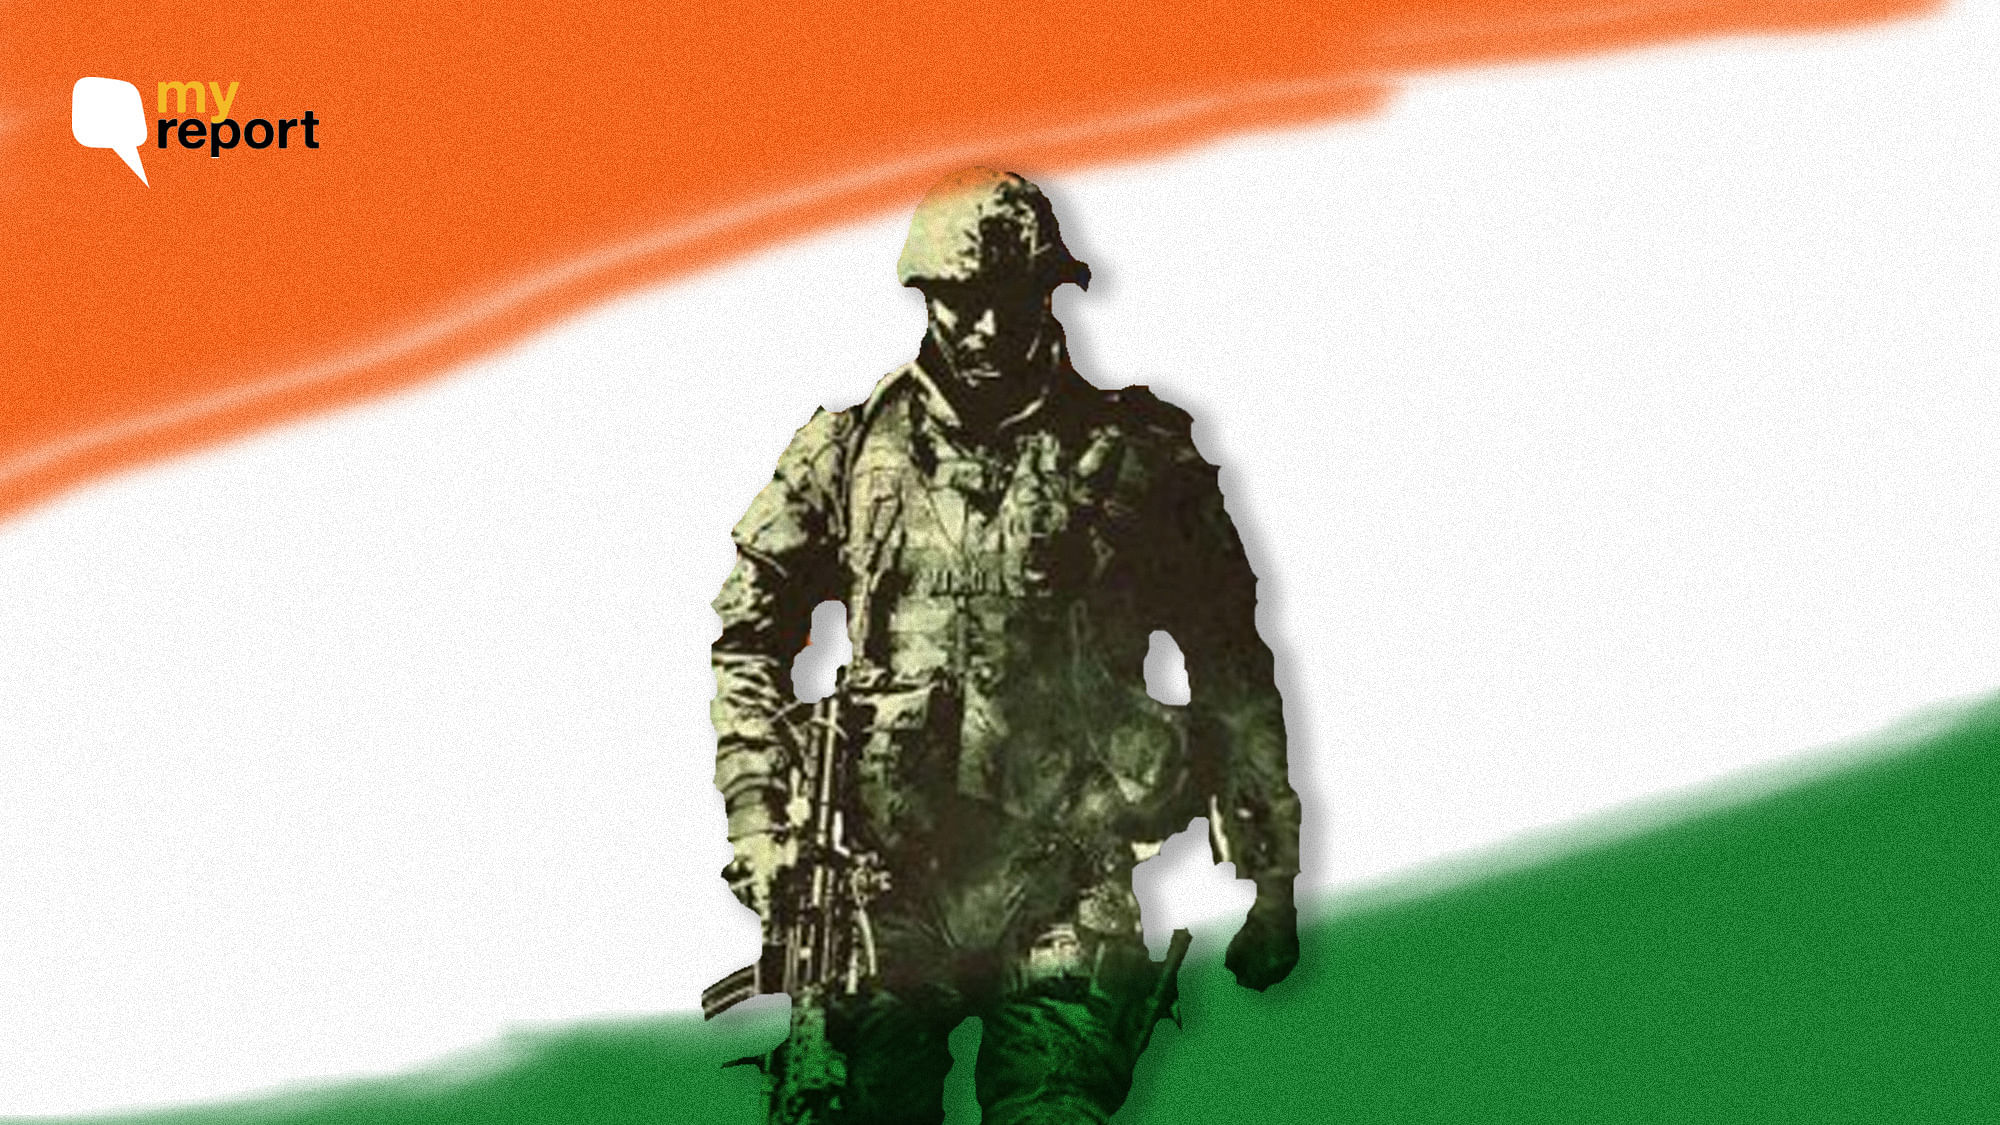 Tweeple lauded the courage, spirit and valour of the Indian army on Army Day, celebrated on 15 January. 